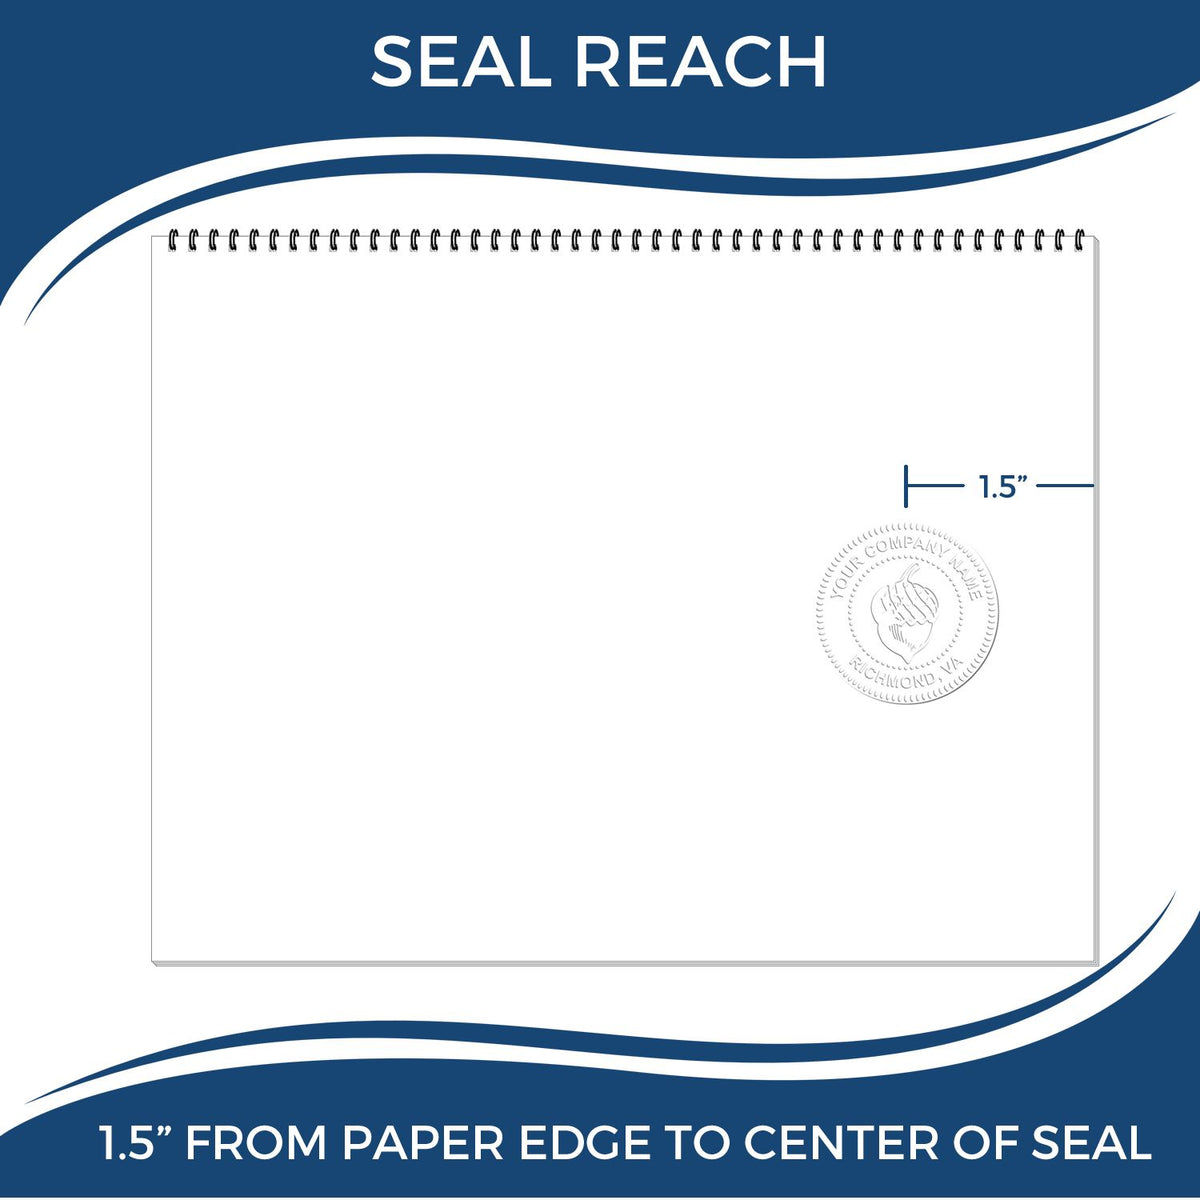 An infographic showing the seal reach which is represented by a ruler and a miniature seal image of the Kentucky Engineer Desk Seal